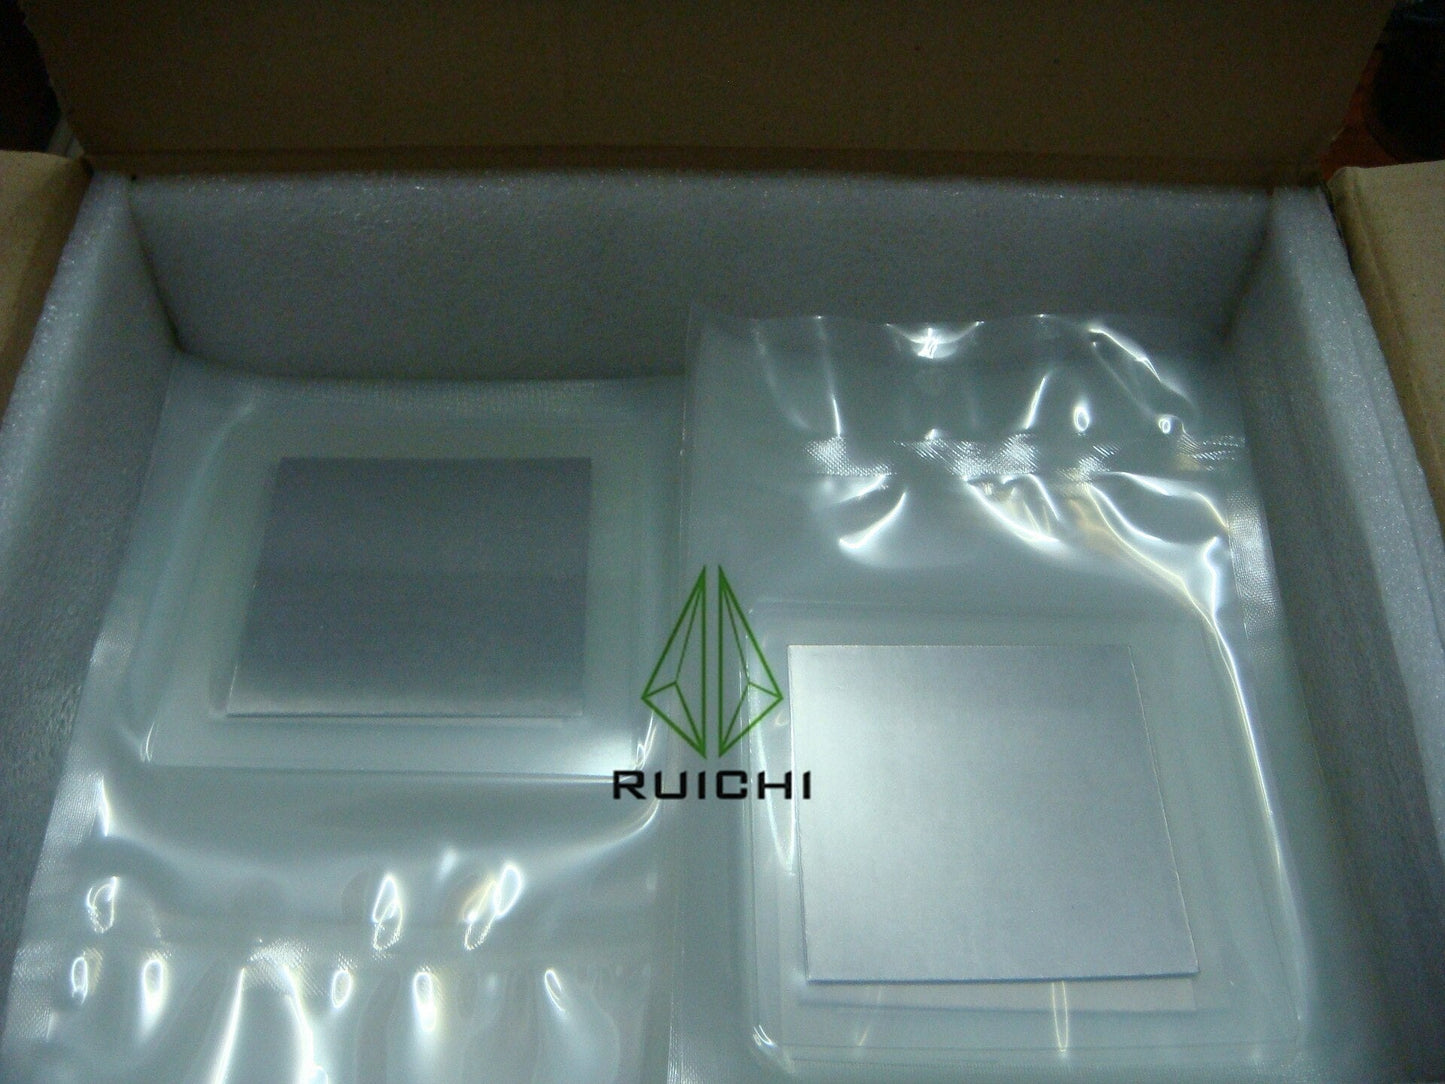 0.5mm Thickness Indium Foil Metal Sheet 99.995% Pure